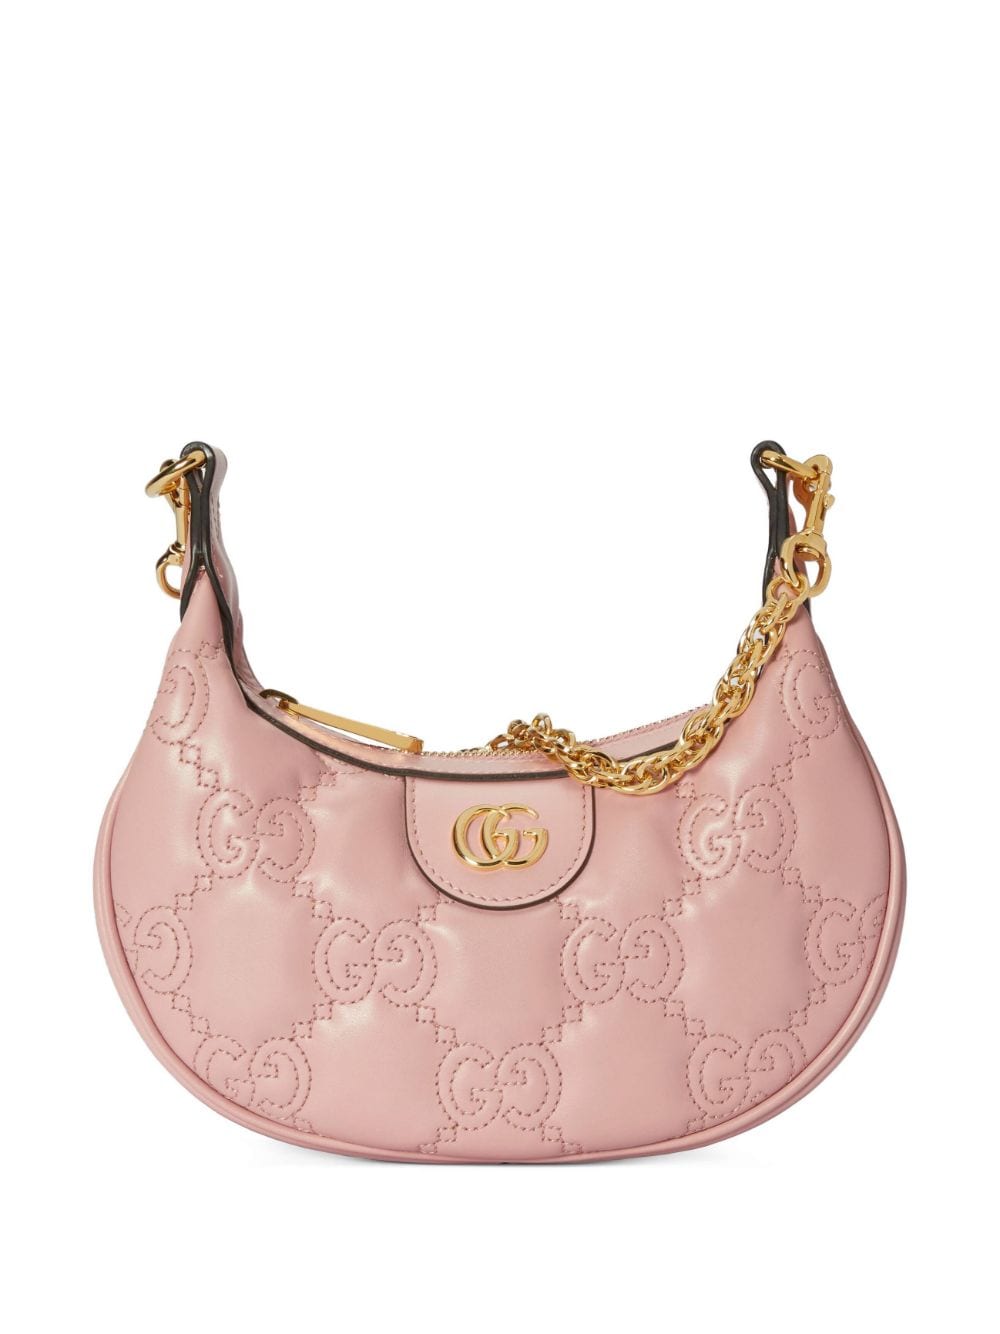 Gucci Dome Shoulder Bag MicroGuccissima Leather Pink in Leather with  Silvertone  US